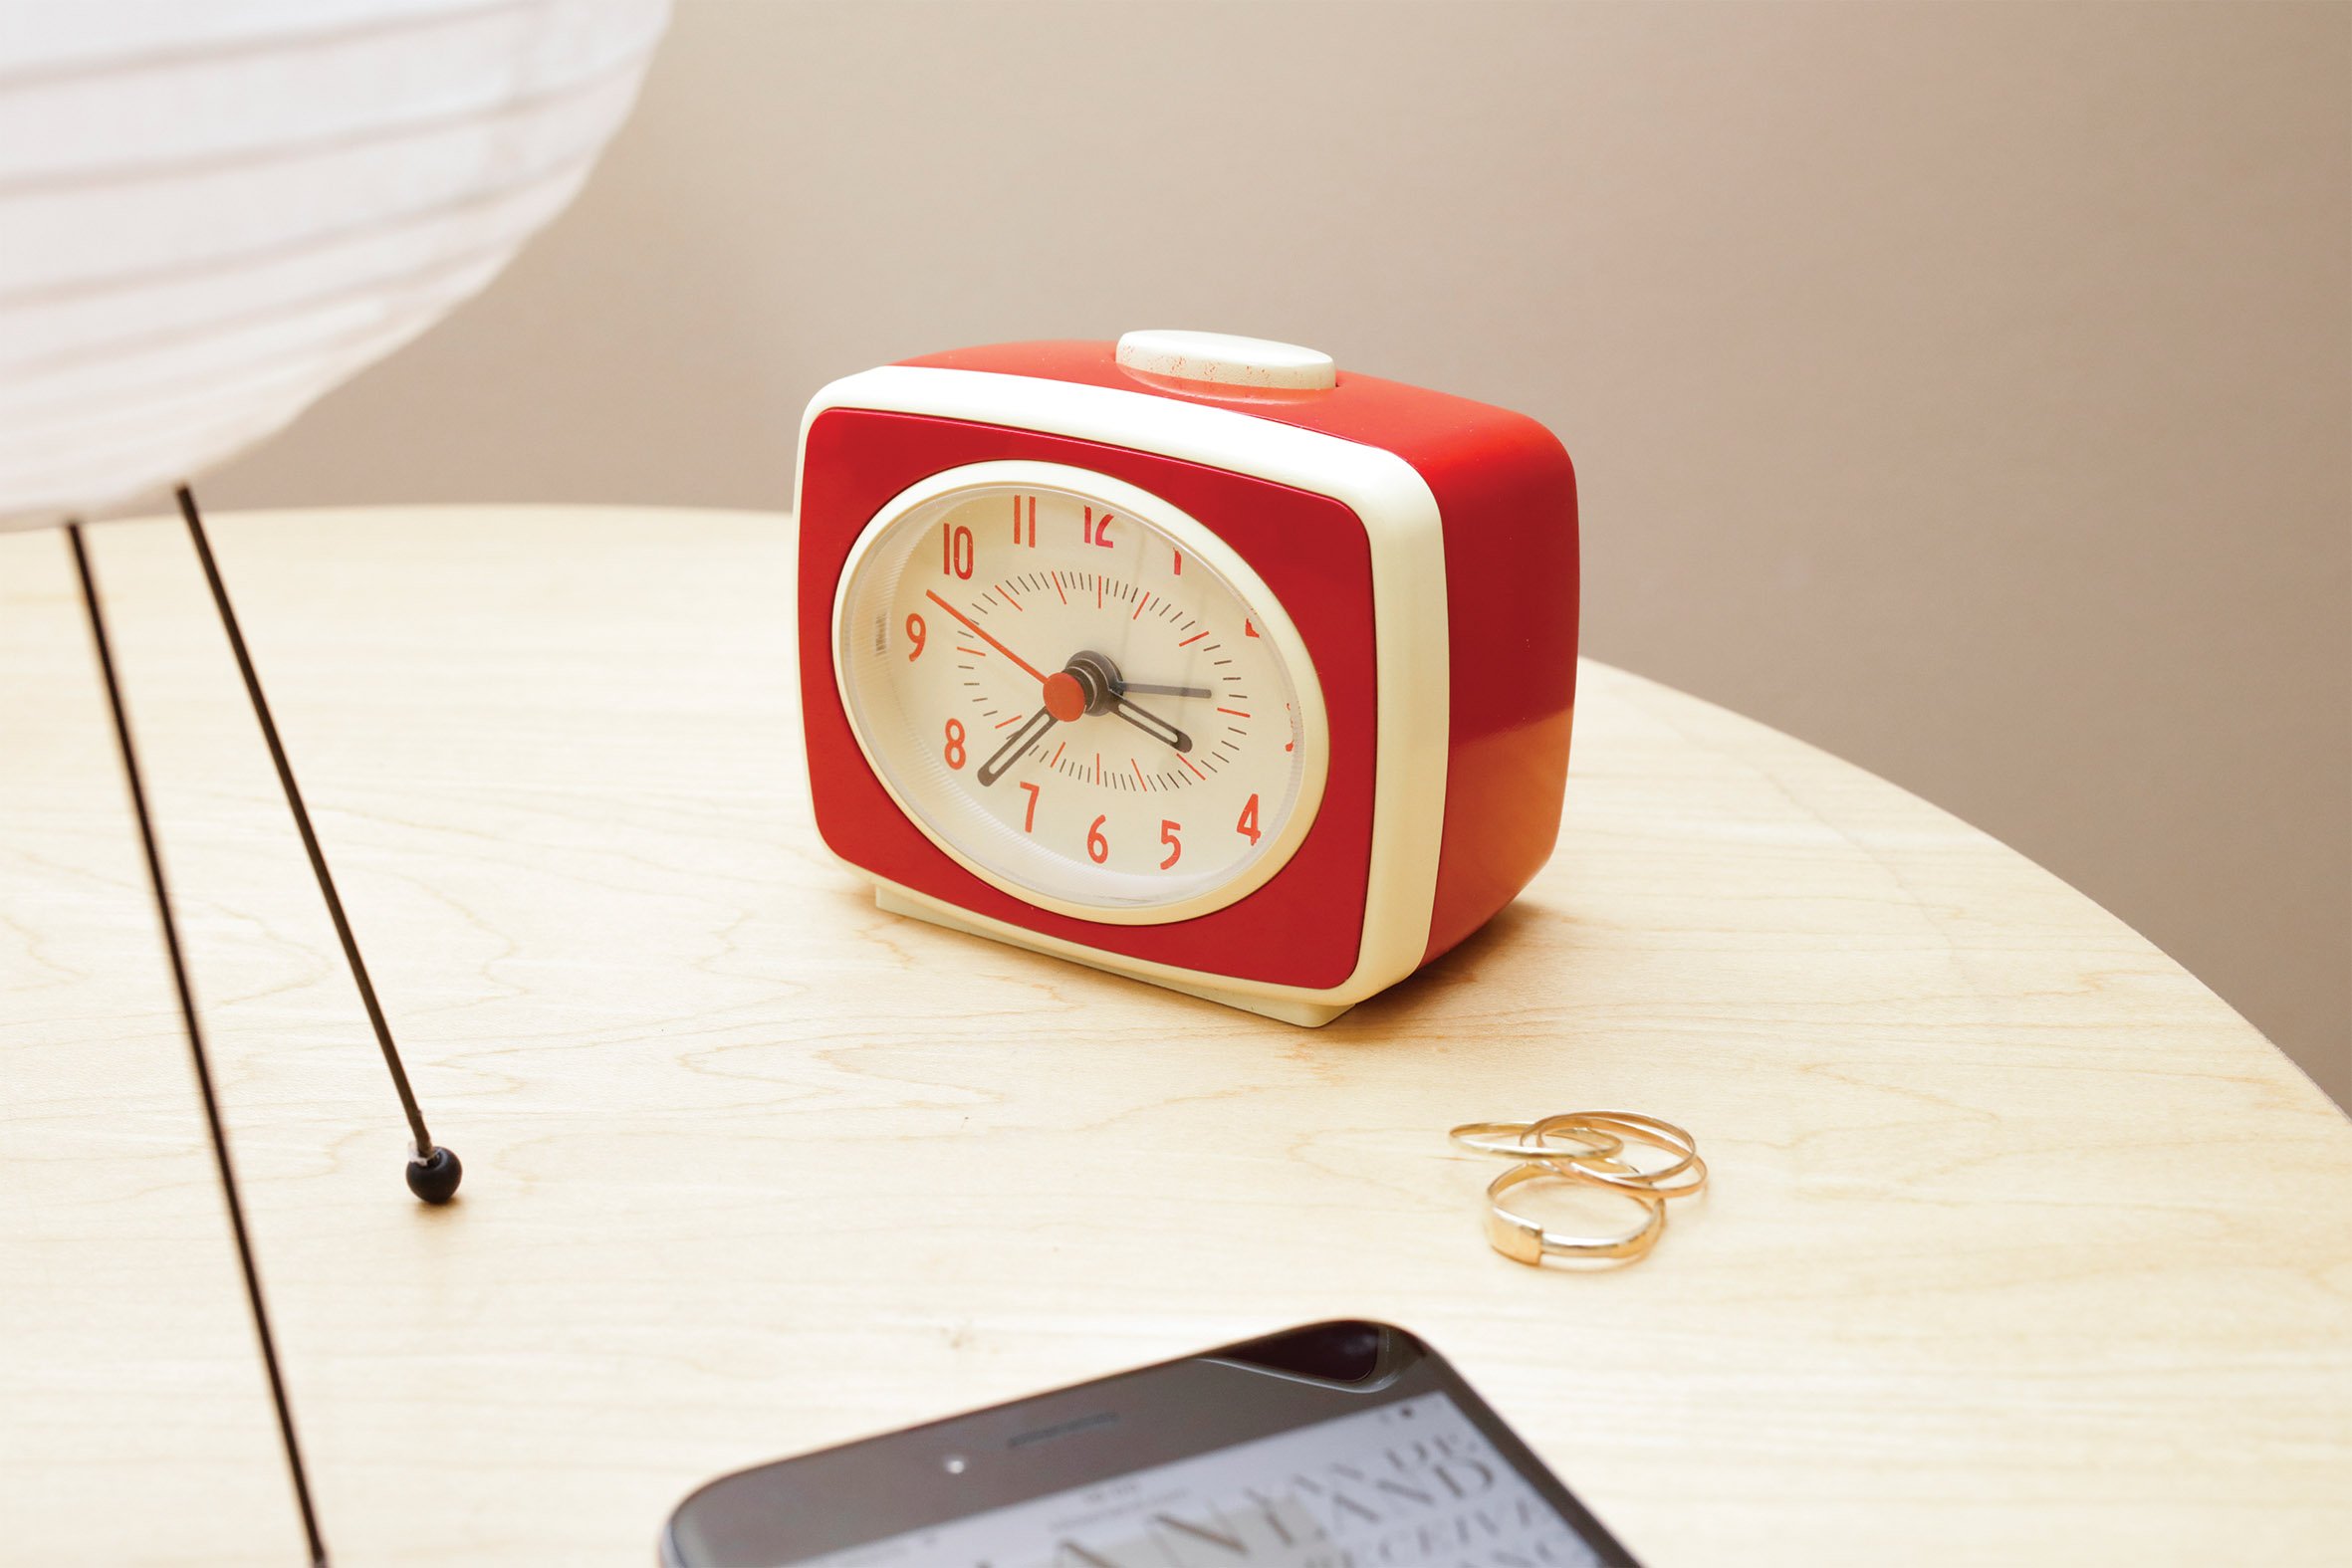 Kikkerland Small Retro Classic Vintage Style Ticking Quartz Movement Analog Alarm Clock, Glow in The Dark Hands, for Bedroom, Office, Home Decor, Battery Operated, in Red